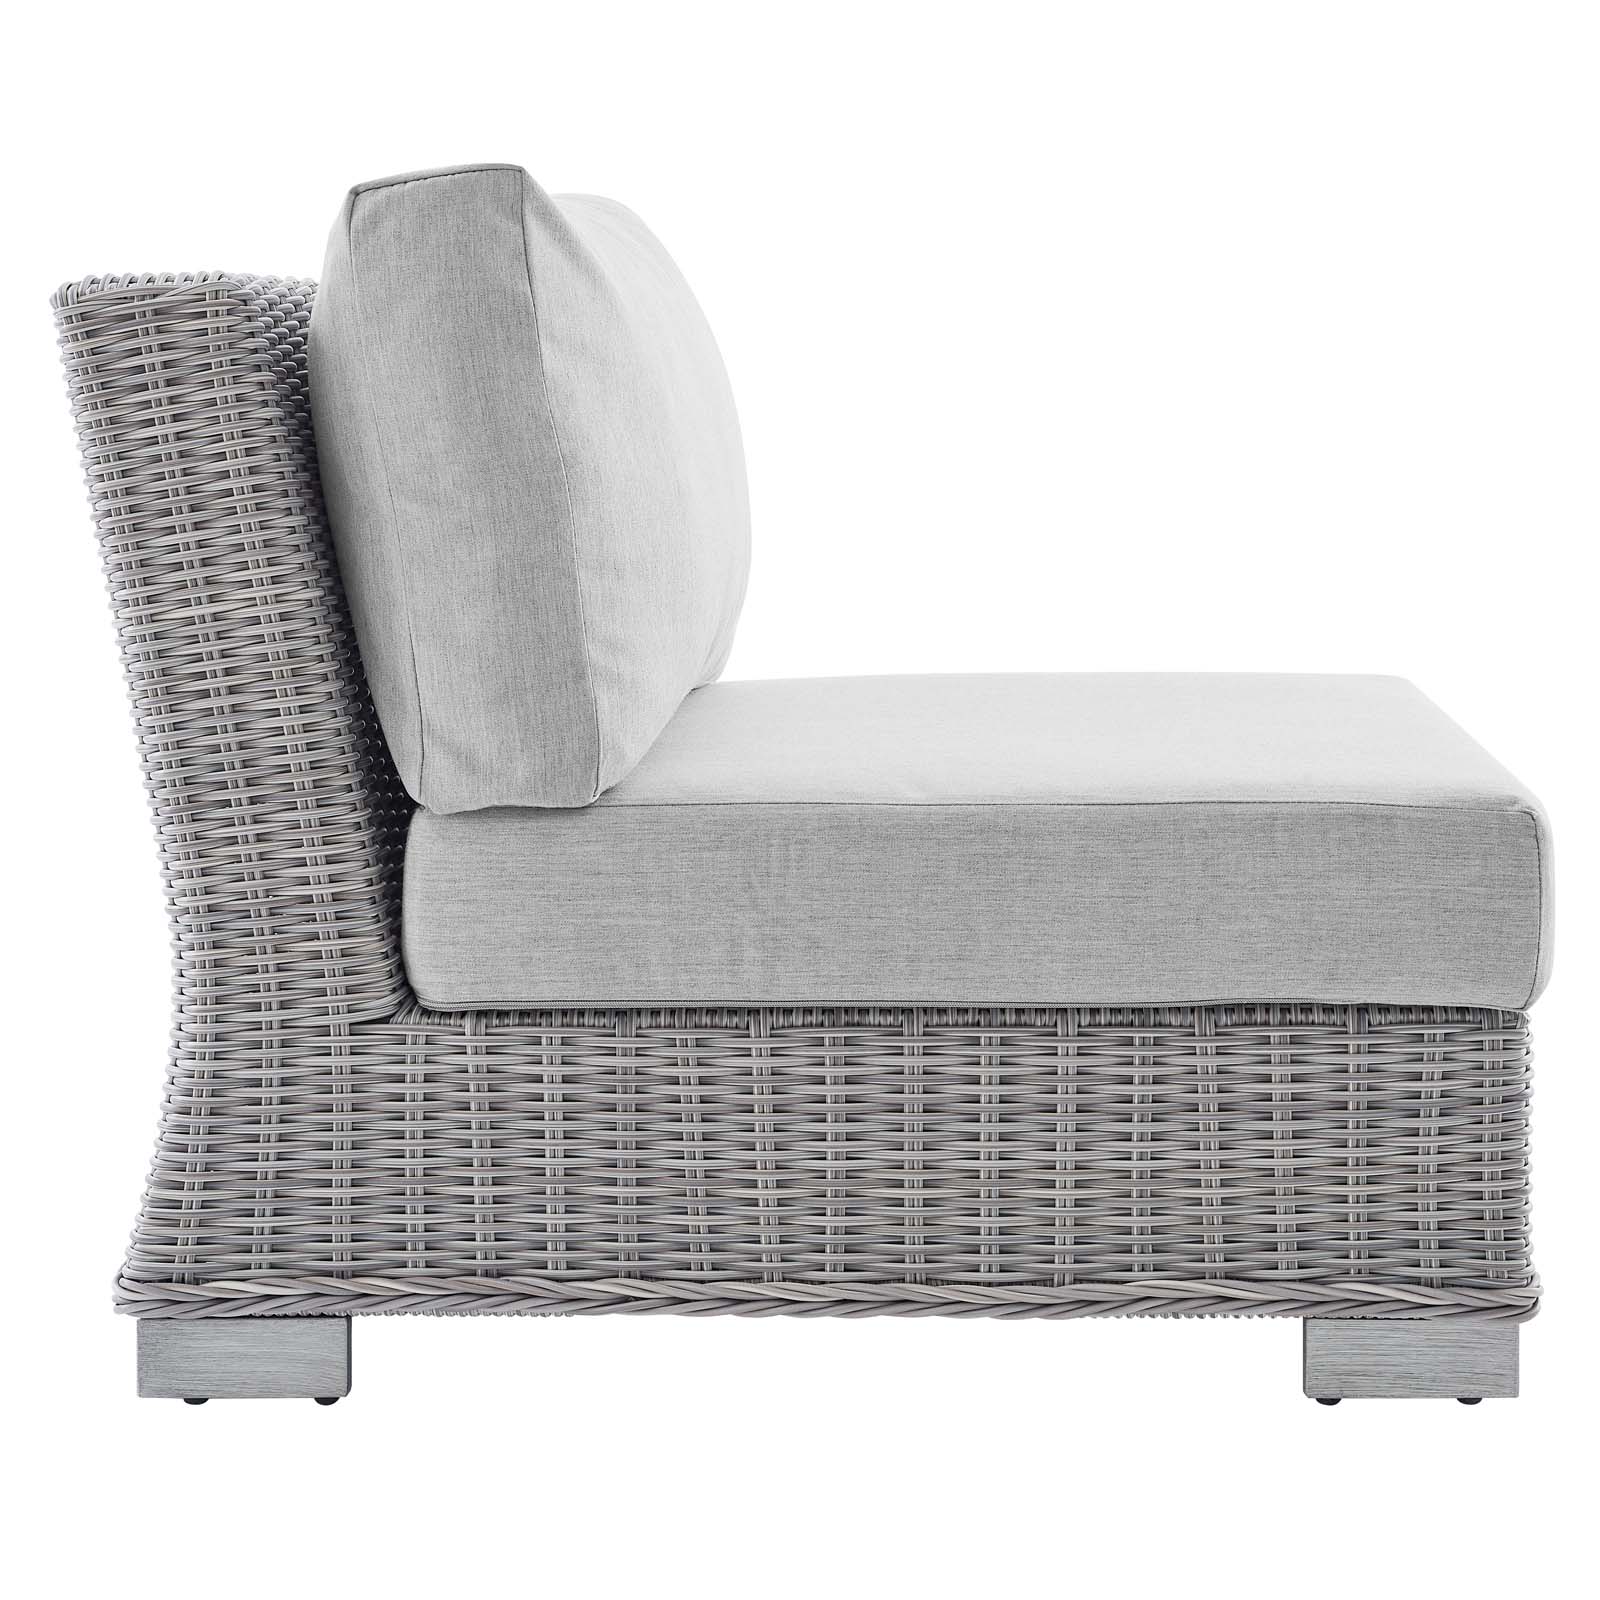 Modway Conway Sunbrella® Outdoor Patio Wicker Rattan Armless Chair in Light Gray Gray - image 3 of 9